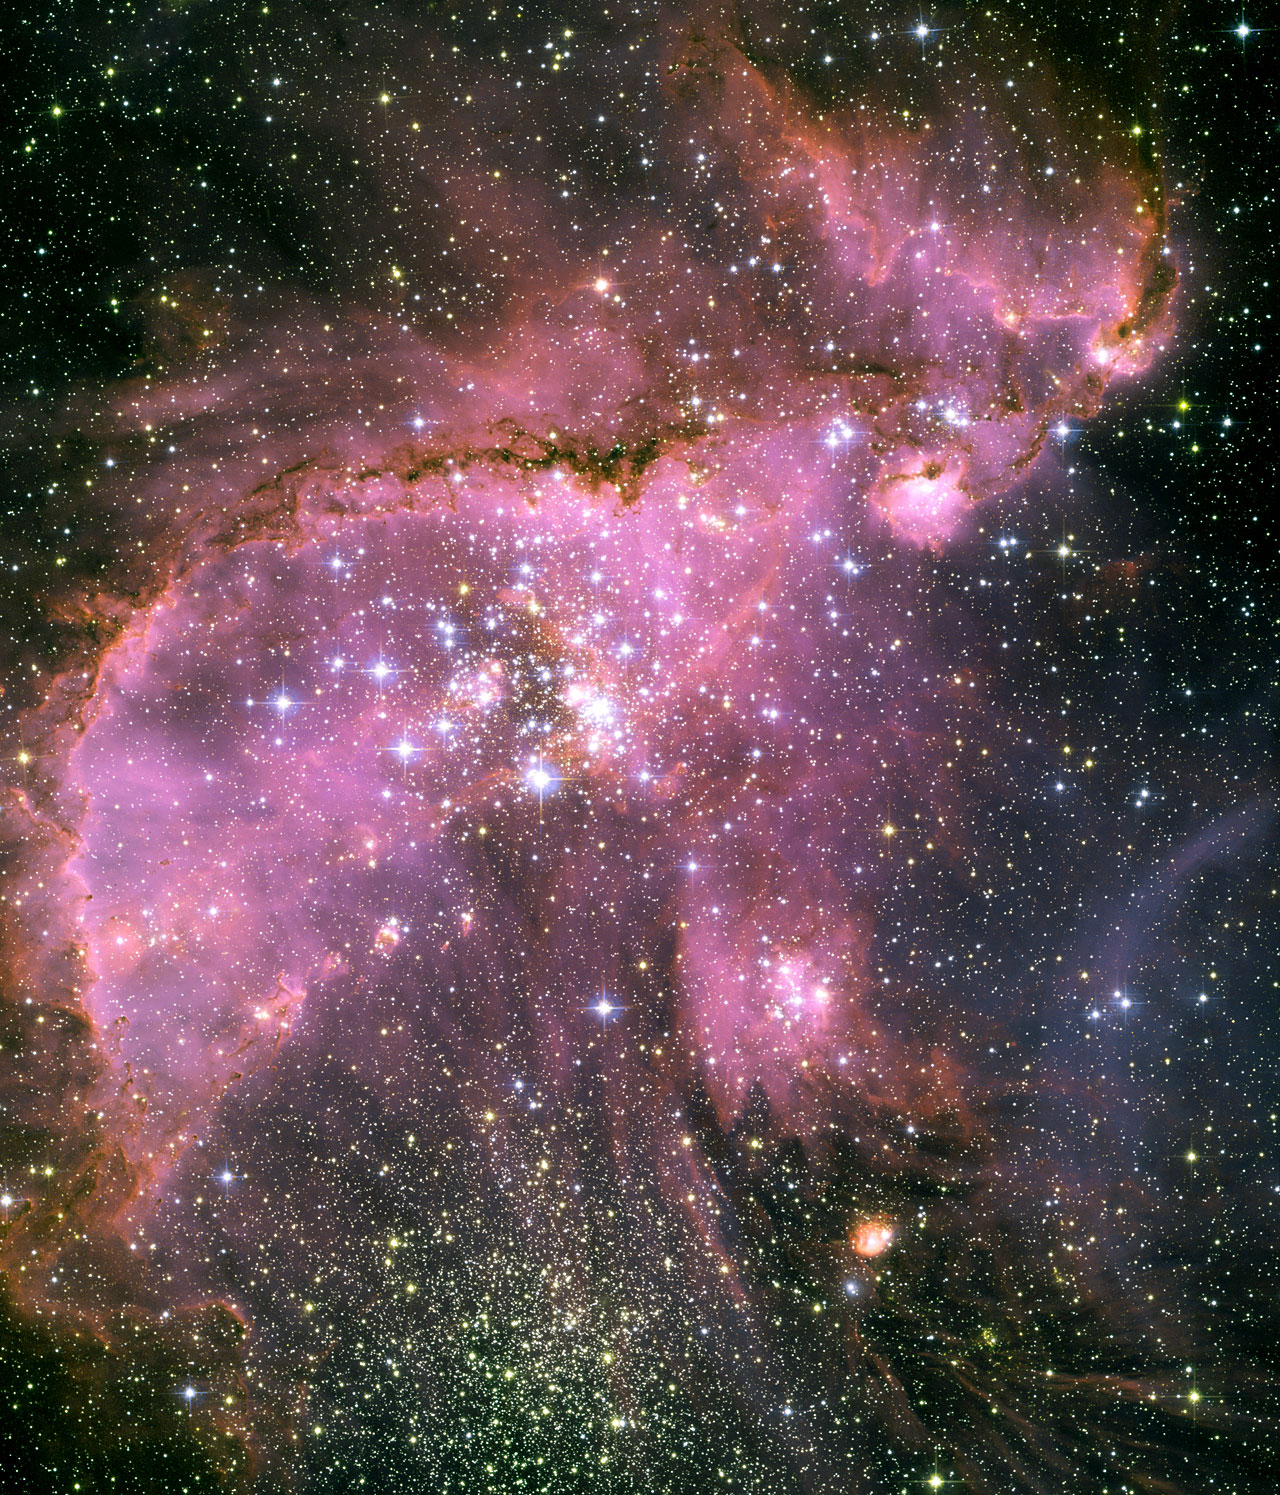 NGC 346 (star cluster in the Small Magellanic Cloud)